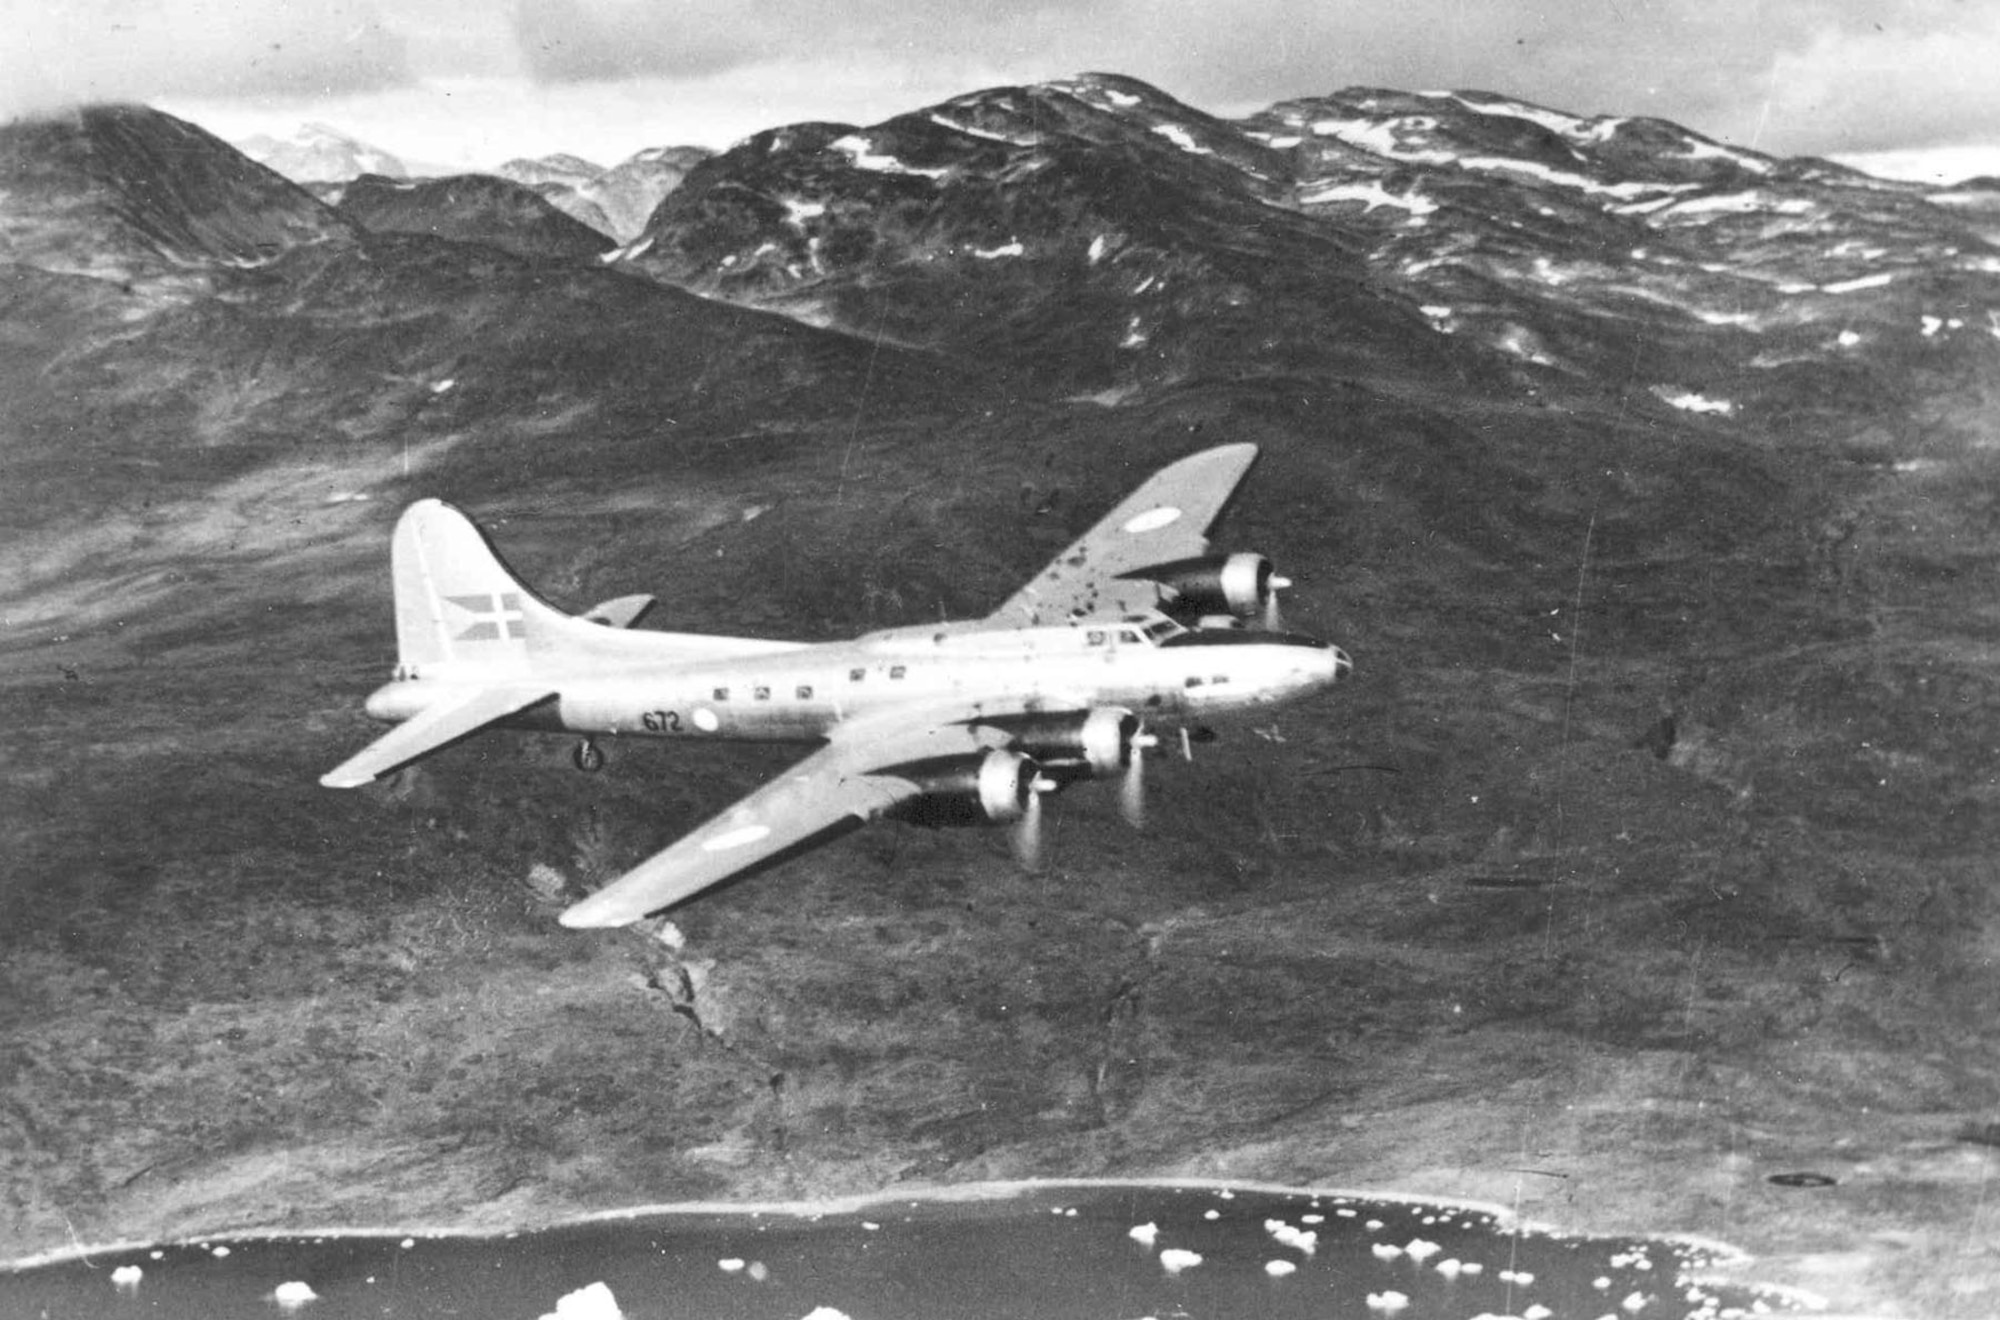 Boeing B-17G "Shoo Shoo Shoo Baby" in flight.  The aircraft carried the name "Store Bjorn" while in service with Denmark. (U.S. Air Force photo)